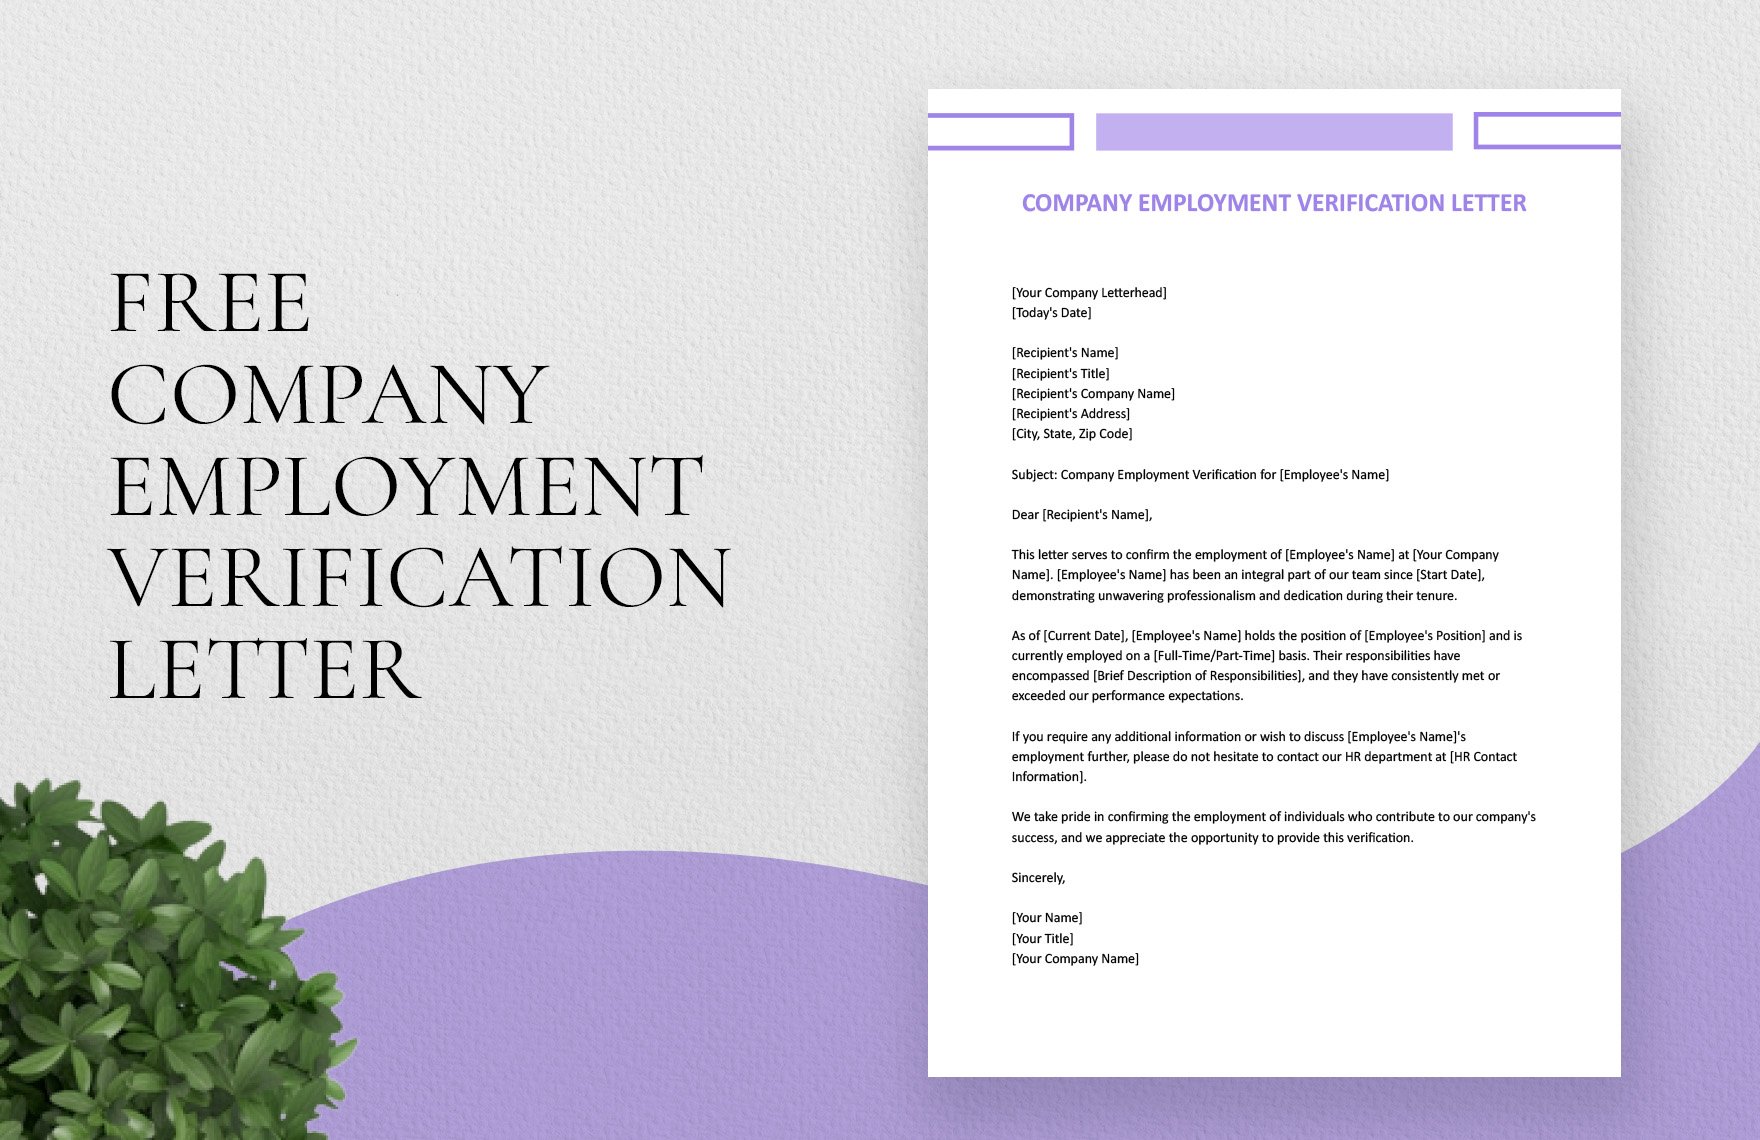 Free Company Employment Verification Letter in Word, Google Docs